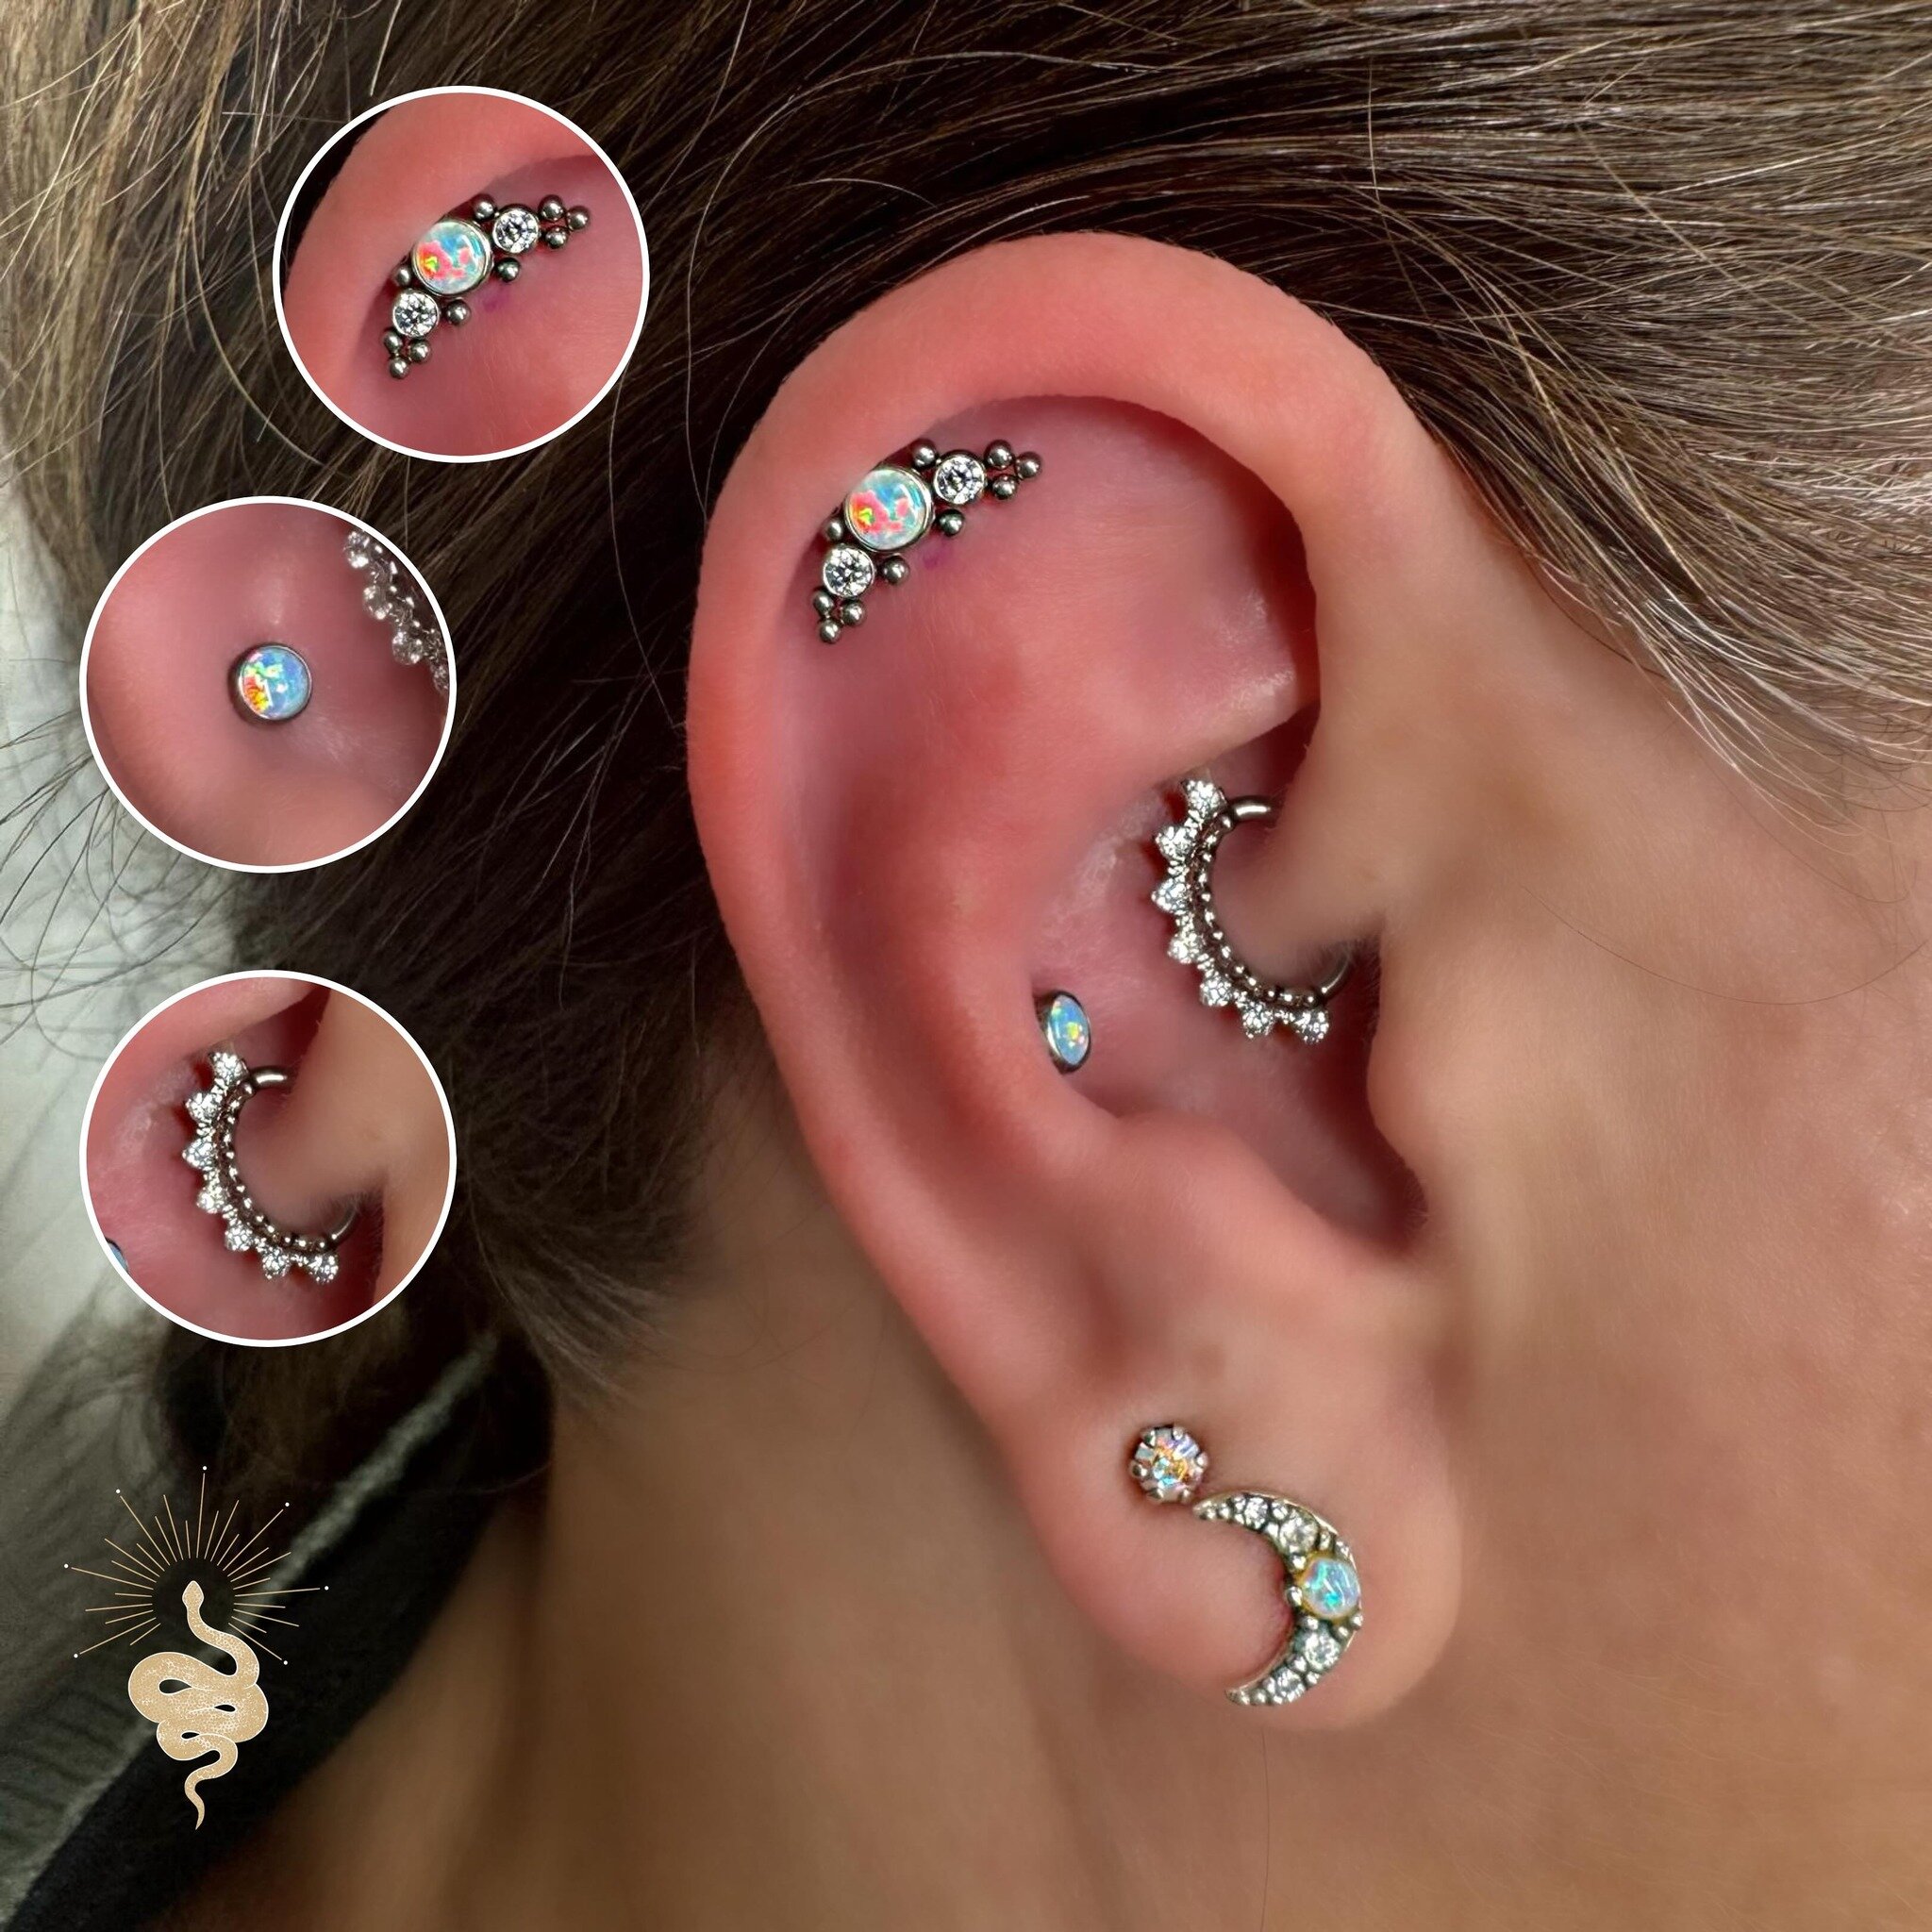 New Helix piercing with a gorgeous Opal &amp; Crystal cluster ✨
Conch piercing with matching Opal ✨
Daith upgraded with Crystal Clicker ✨

📍 Studio 59 Tattoos
3-5 Victoria Road, MK2 2NG Milton Keynes
💌 Message to book in - or ring 01908 990232 📞

